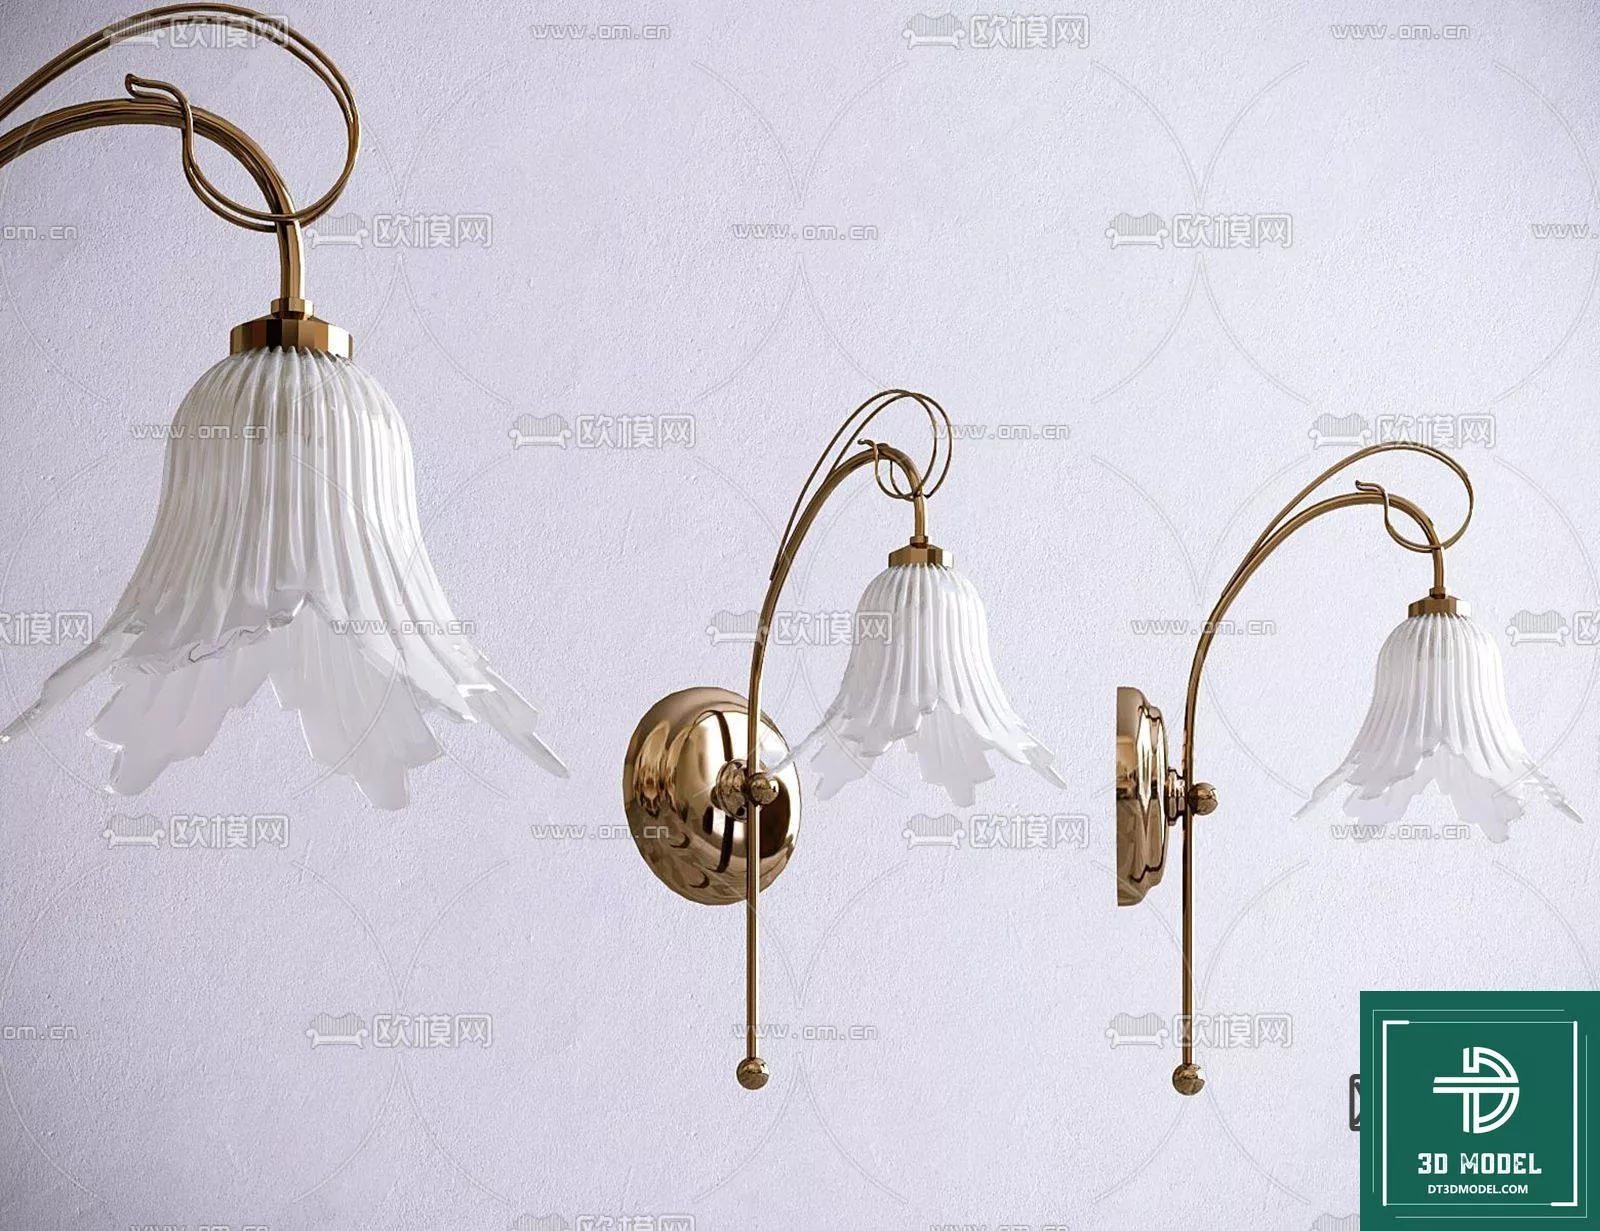 MODERN WALL LAMP - SKETCHUP 3D MODEL - VRAY OR ENSCAPE - ID16048